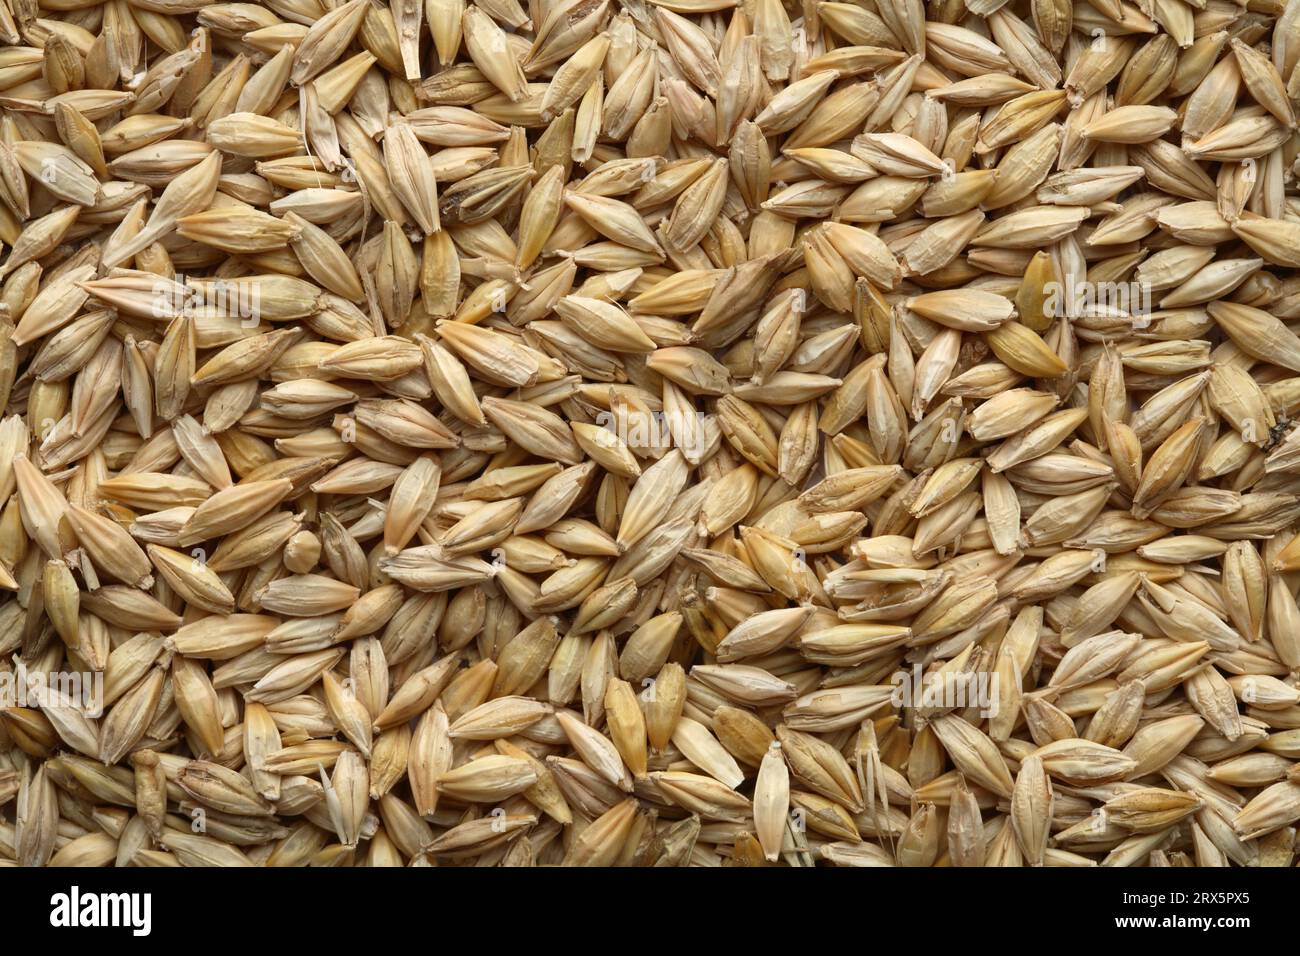 Barley seeds directly from the field Stock Photo